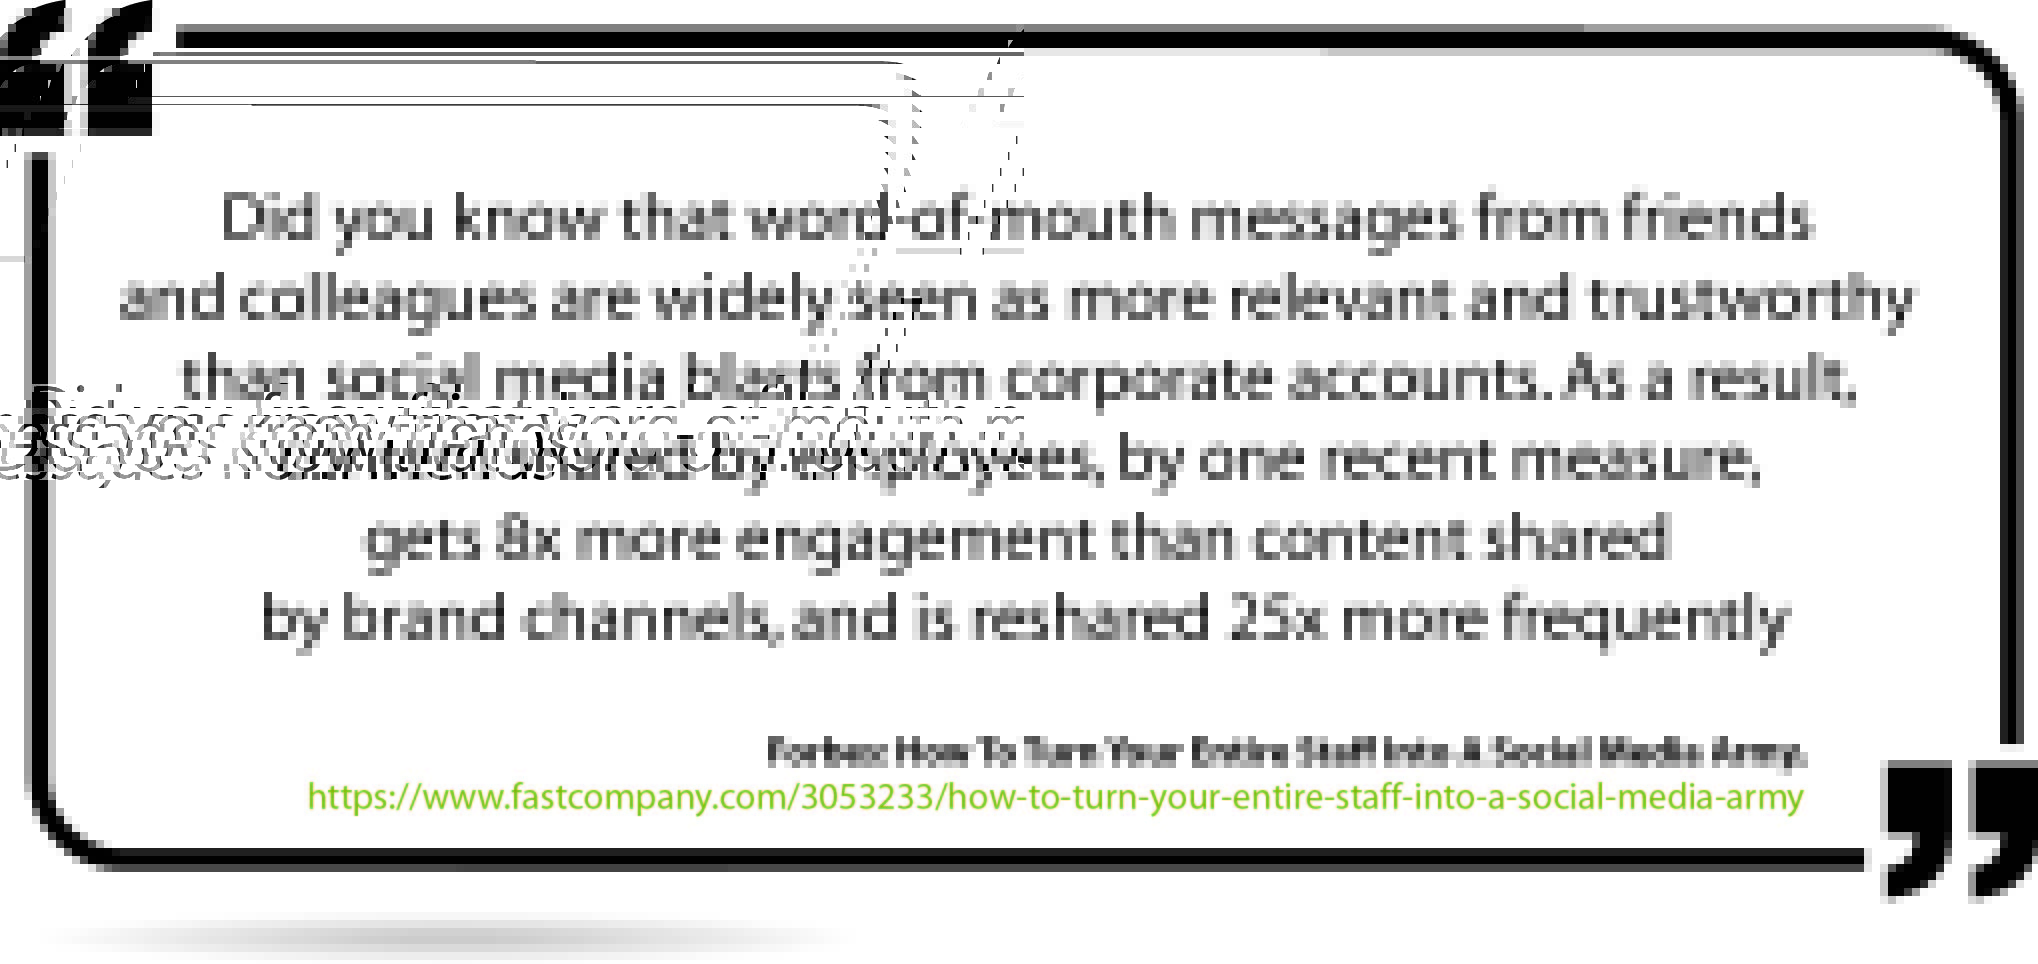 Small Business Online Marketing on a Budget: Employee Word-of-Mouth